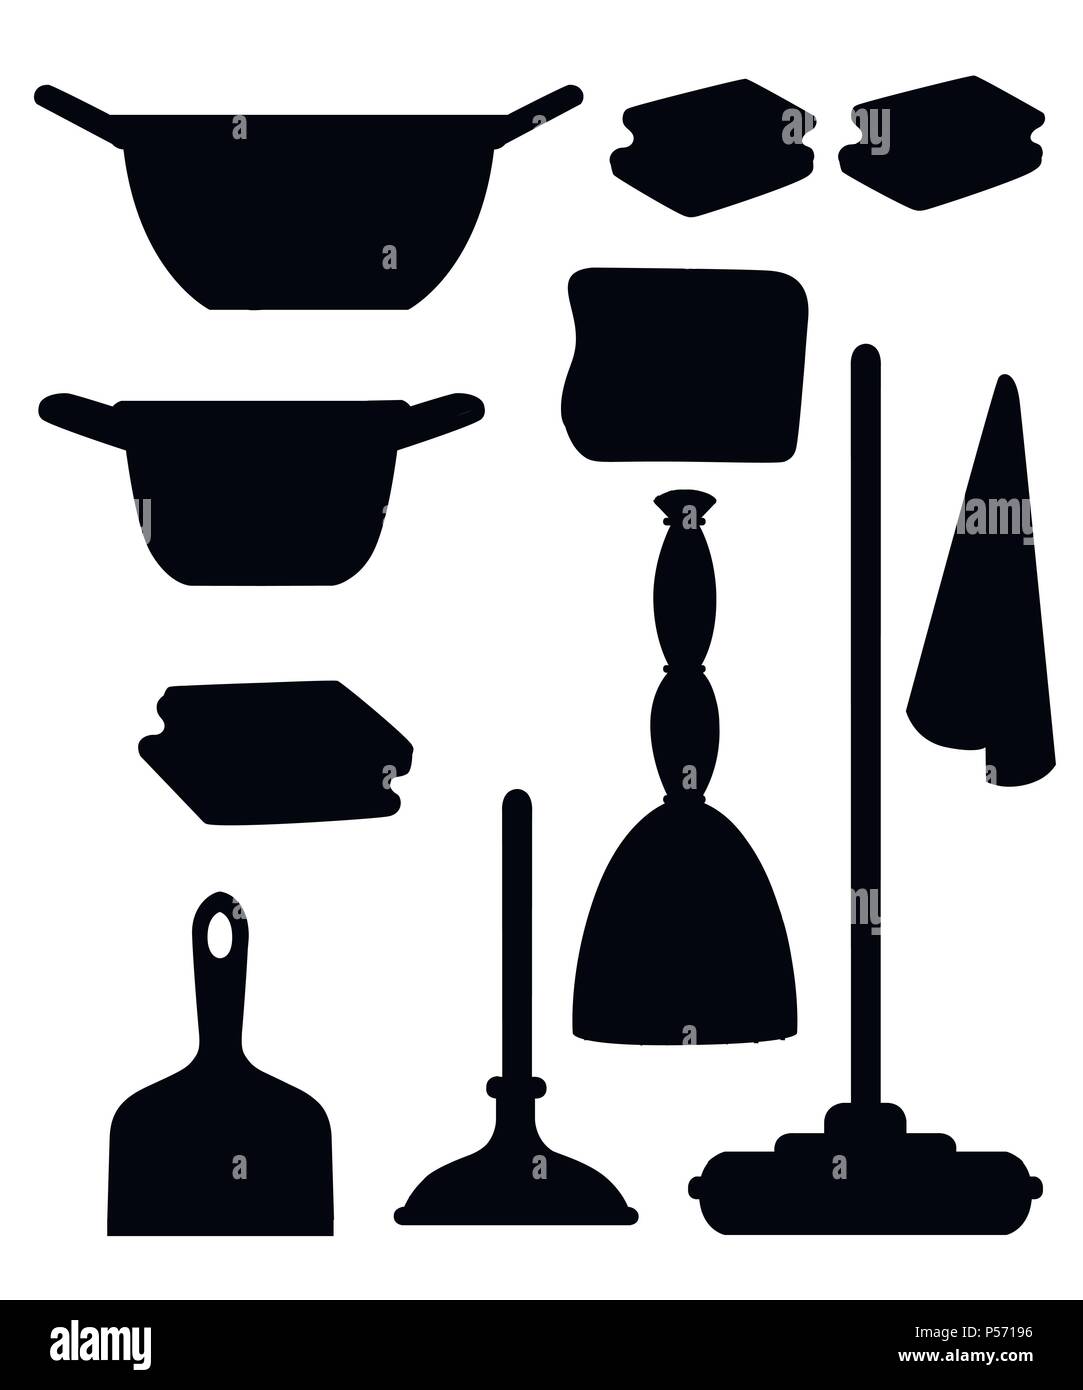 Black silhouette. Cleaning set objects. Plastic dustpan and bowl. Mop, suction cup and rags. Flat design style. Vector illustration isolated on white  Stock Vector